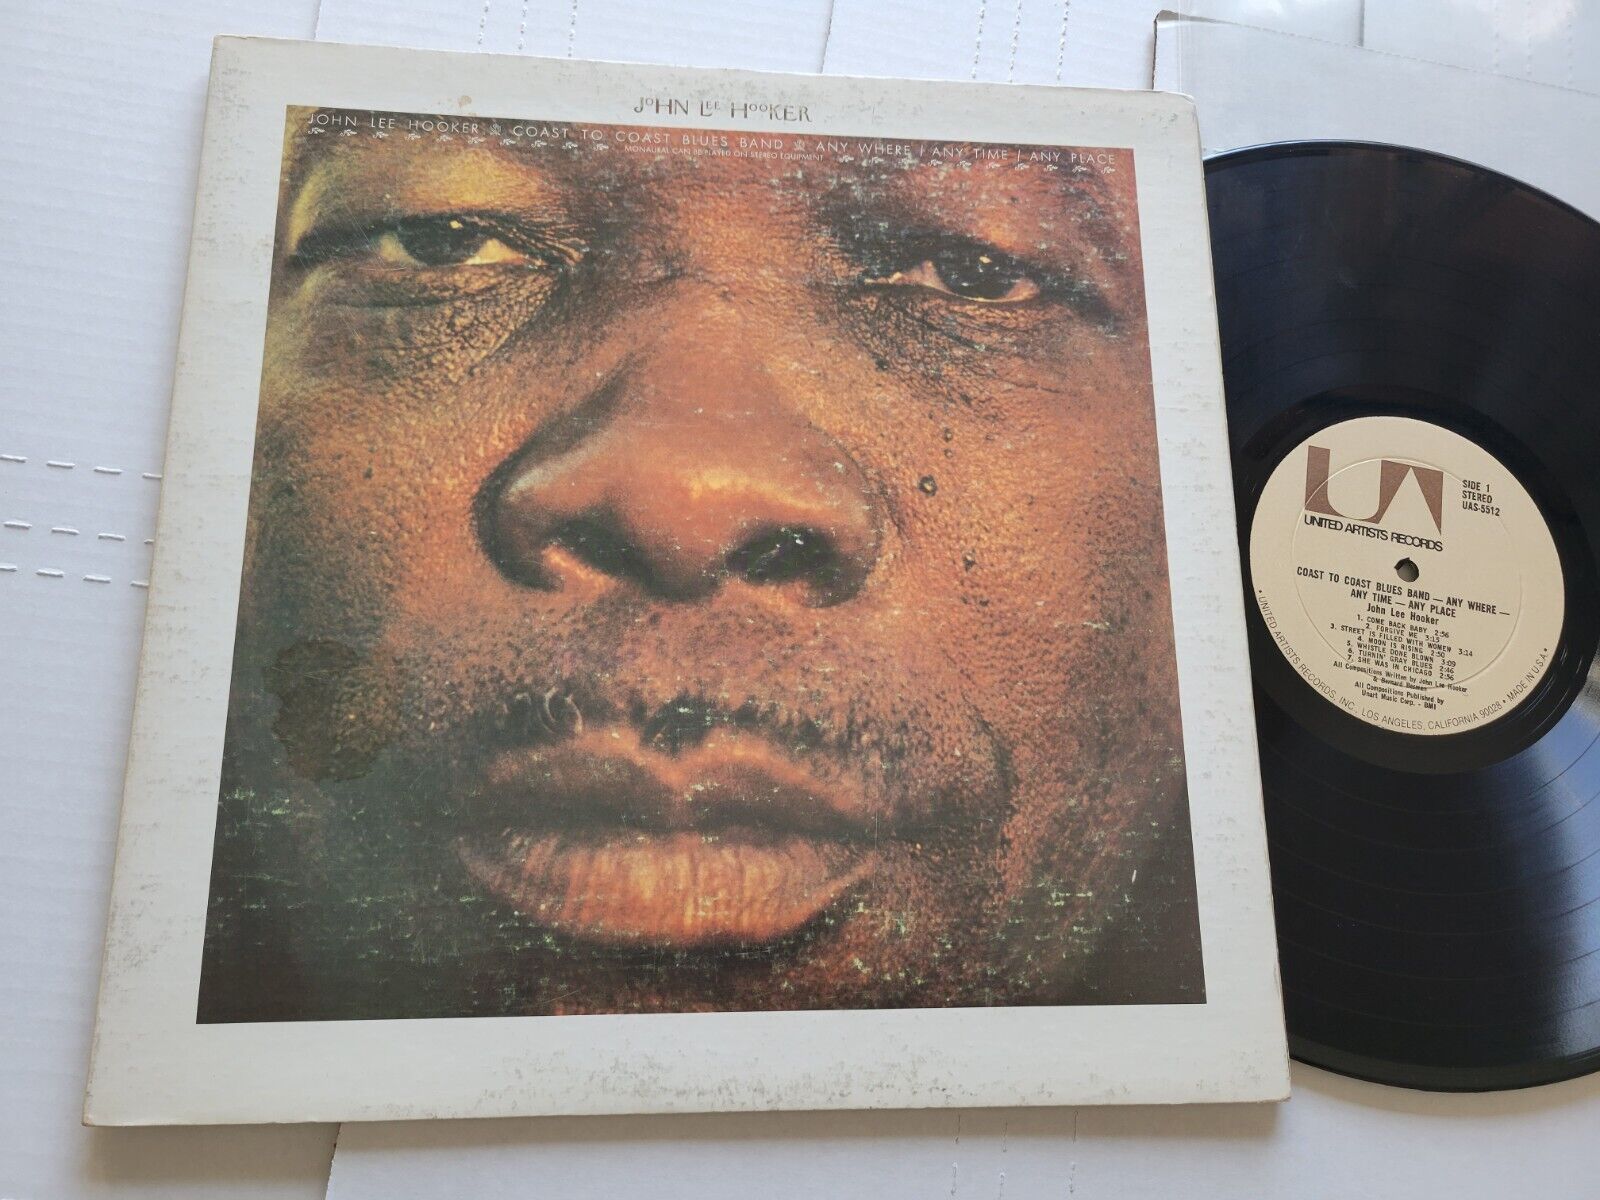 JOHN LEE HOOKER - Any Where Any Time Any Place VG+ 1971 CHICAGO ELECTRIC BLUES